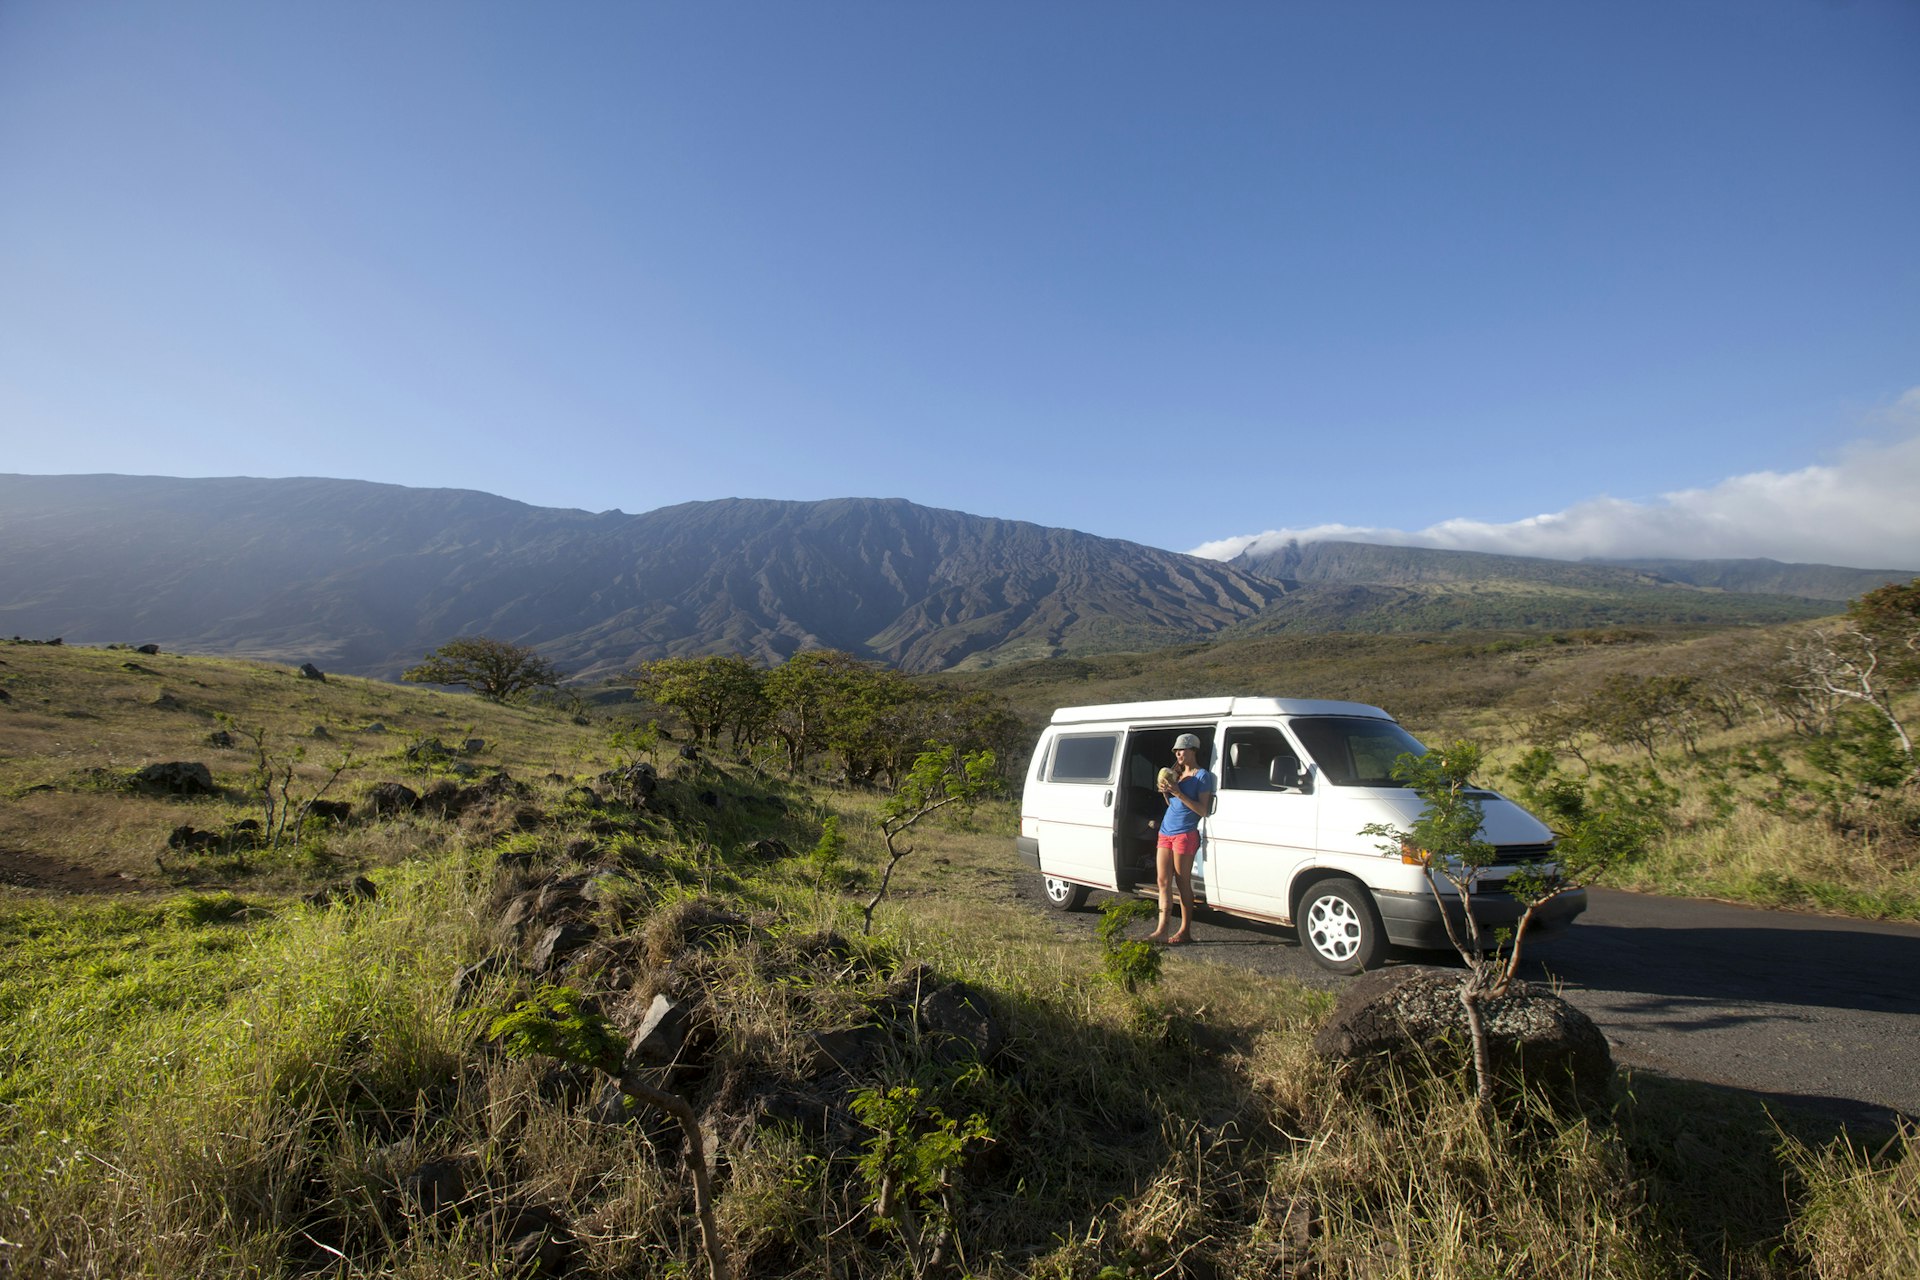 A woman leans on a camper van as she soaks up the view of hills rising around her